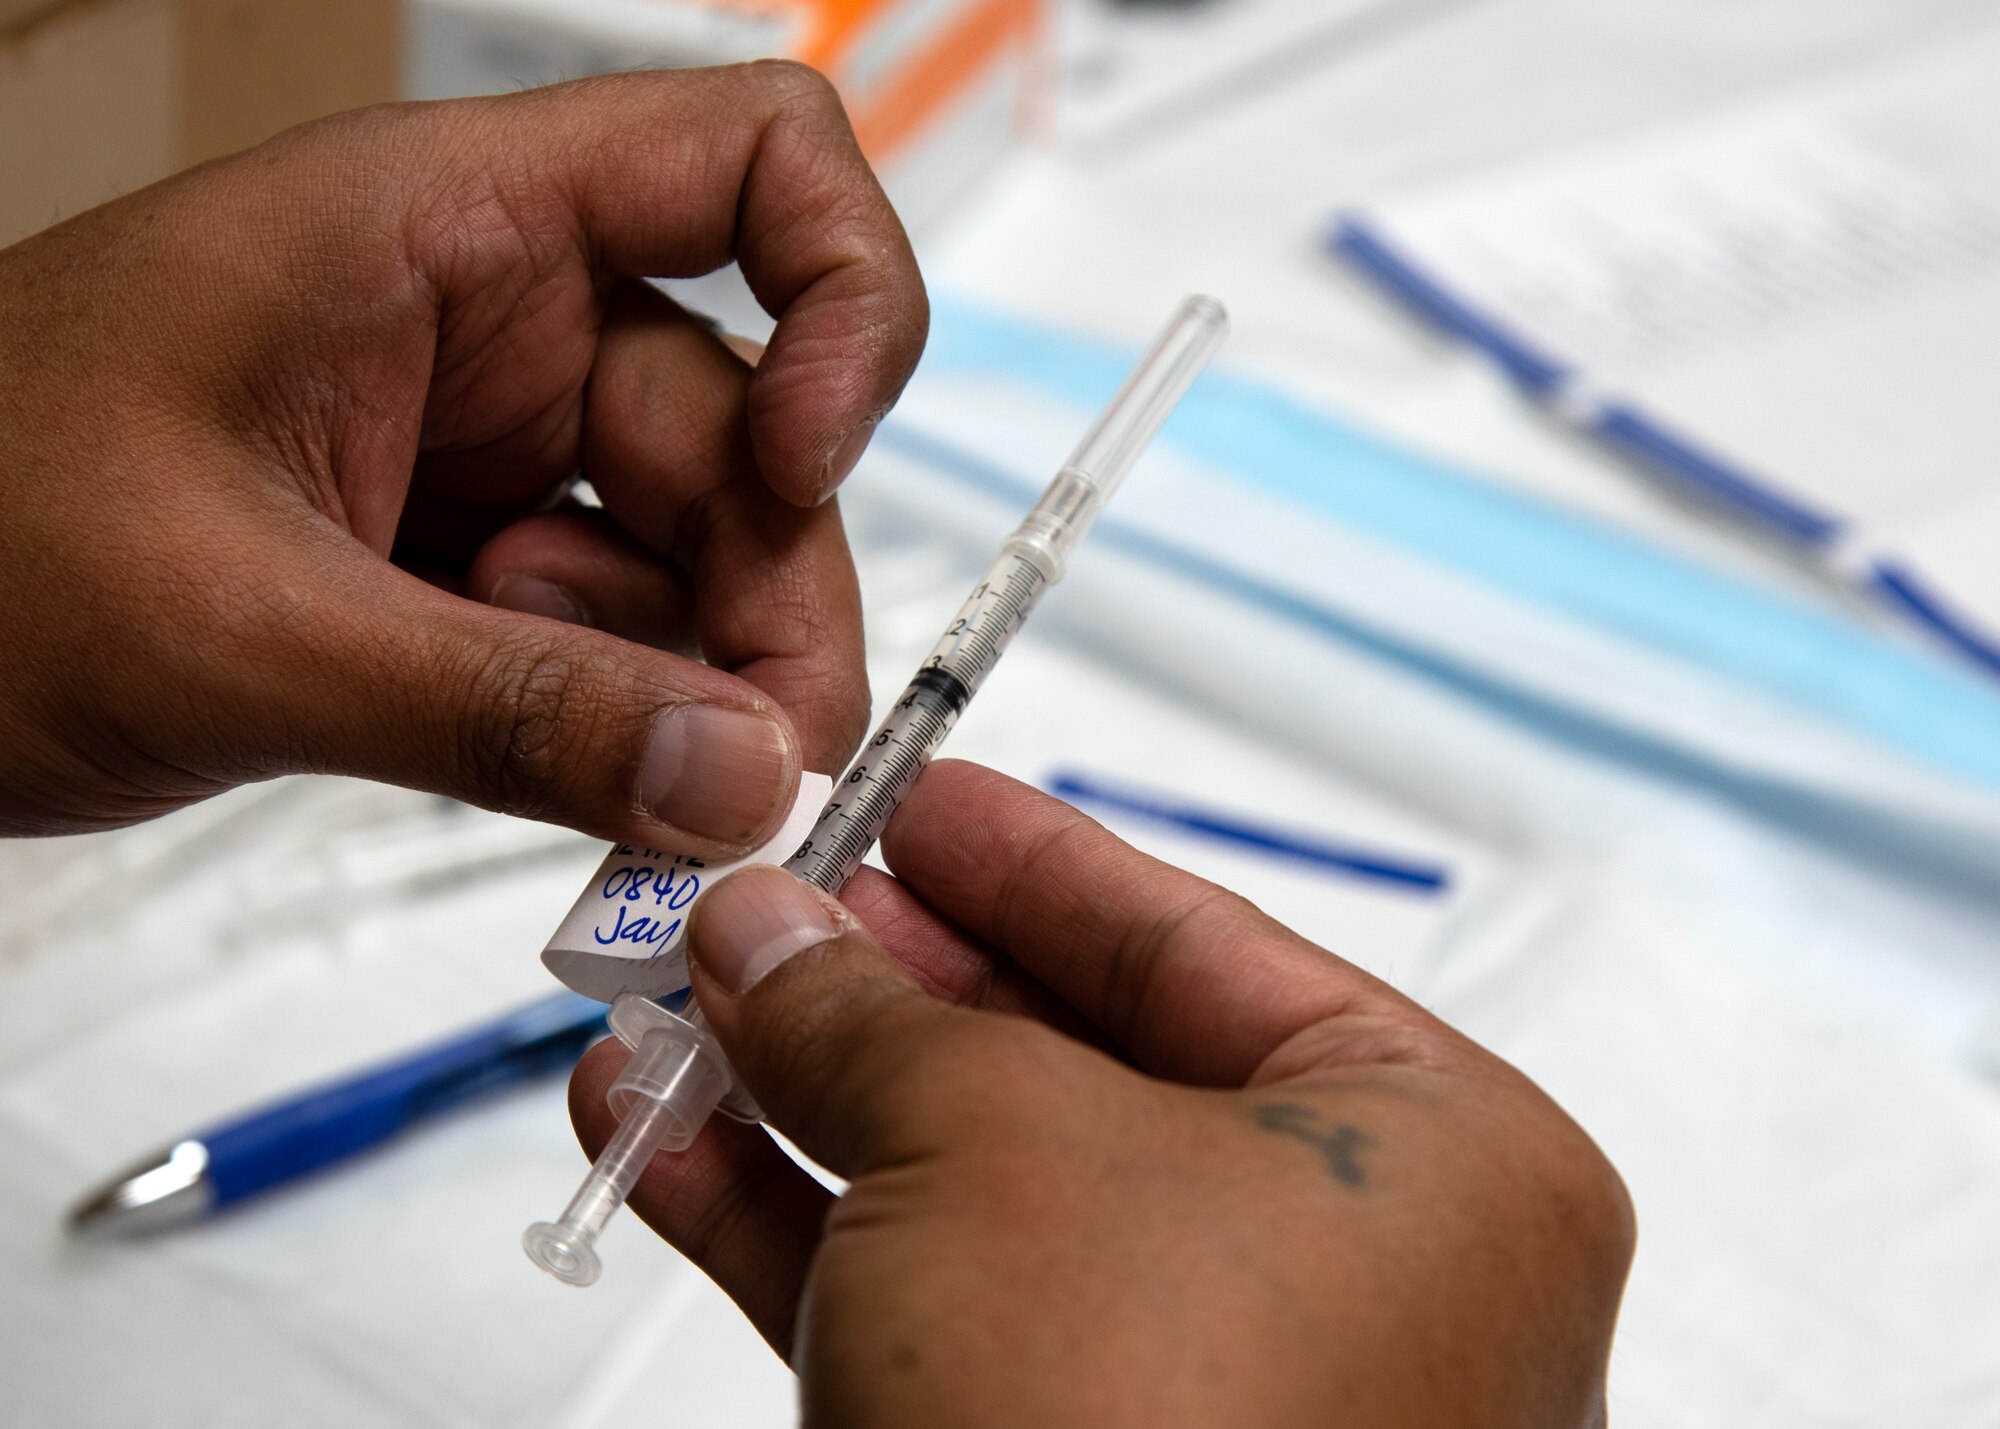 Jay Naigan, a contractor from the 6th Medical Support Squadron, prepares a COVID-19 vaccine for distribution at MacDill Air Force Base, Florida, Sept. 30, 2021.